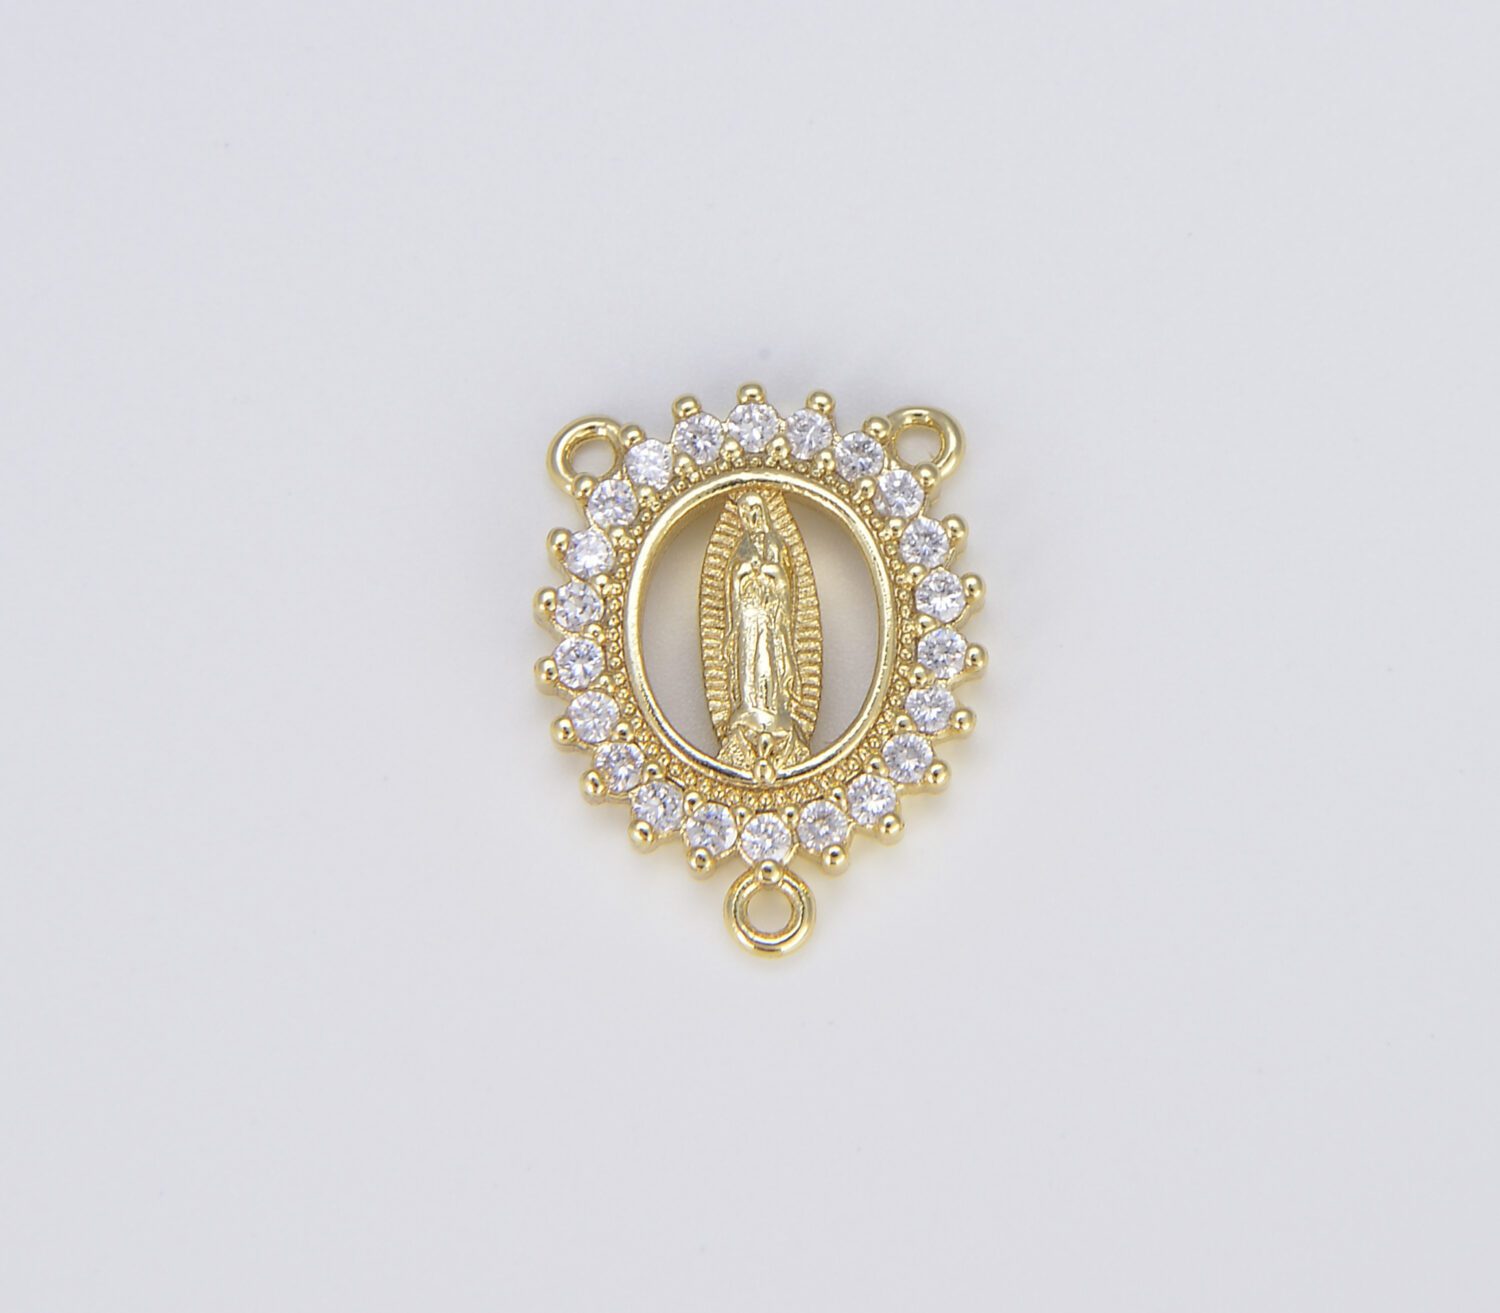 Miraculous Medal Rosary Centerpiece